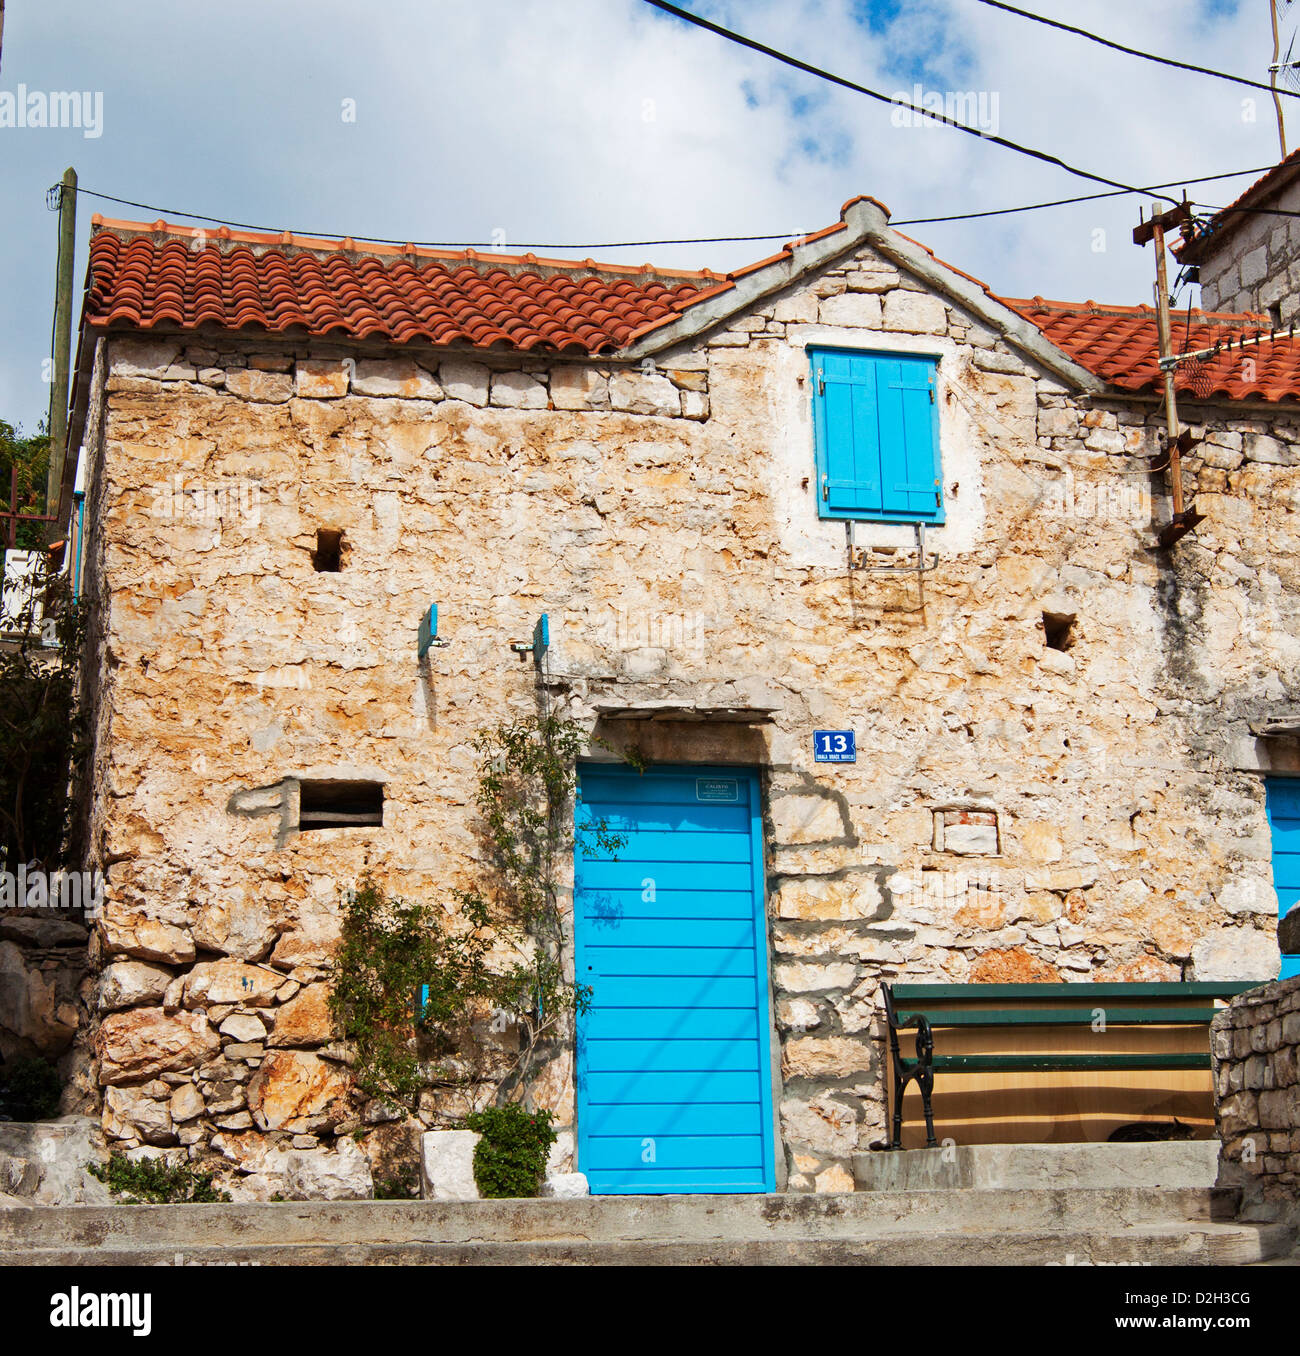 A traditional old cottage with turquoise blue door and windows in the village of Maslinica, Solta Island, Croatia Stock Photo